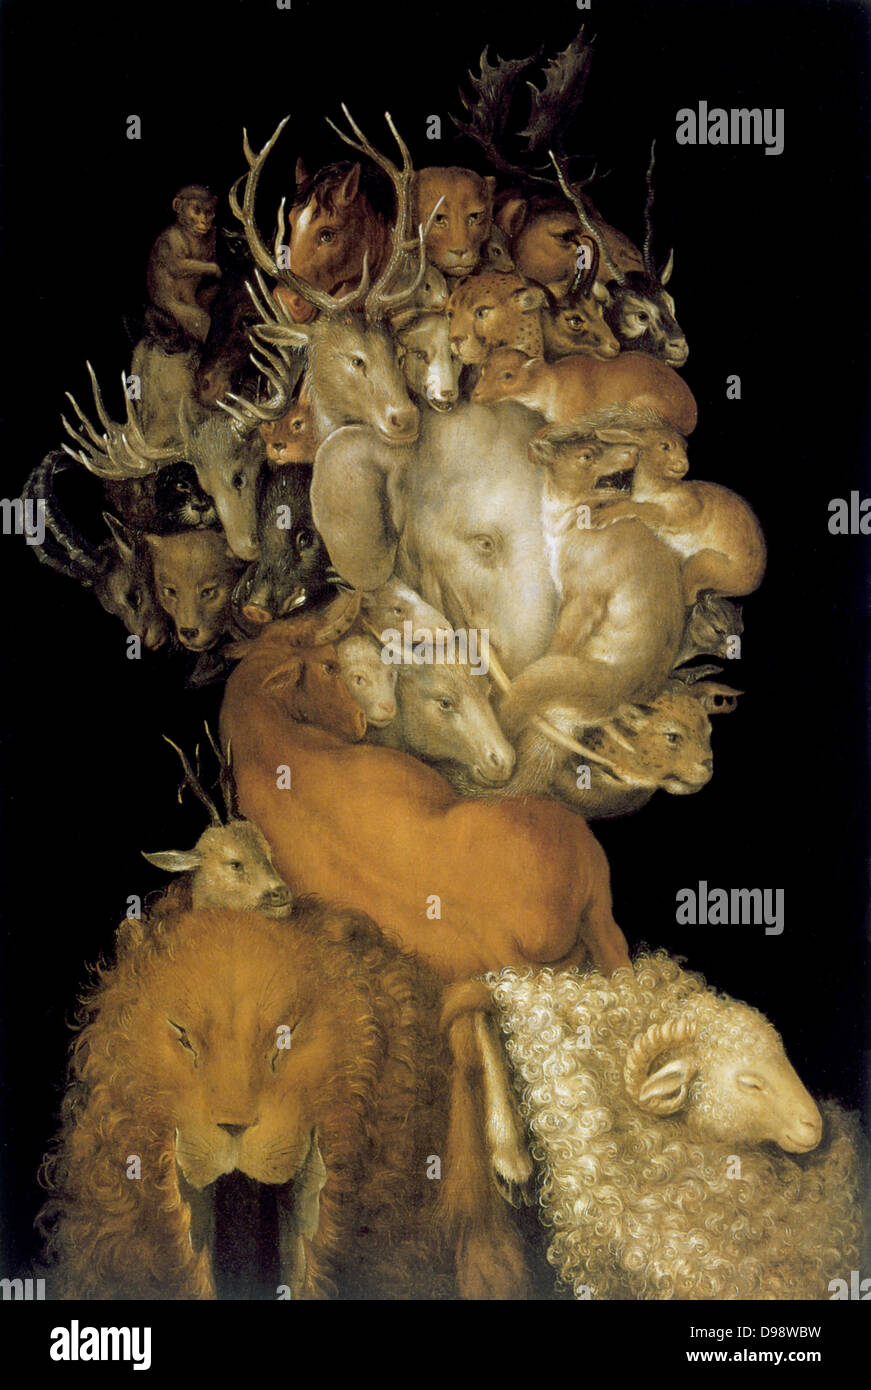 The Earth' Oil on wood. Giuseppe Arcimboldo (c1530-1593) Italian painter. Bizarre 'portrait' composed of heads and bodies of mammals. Stock Photo